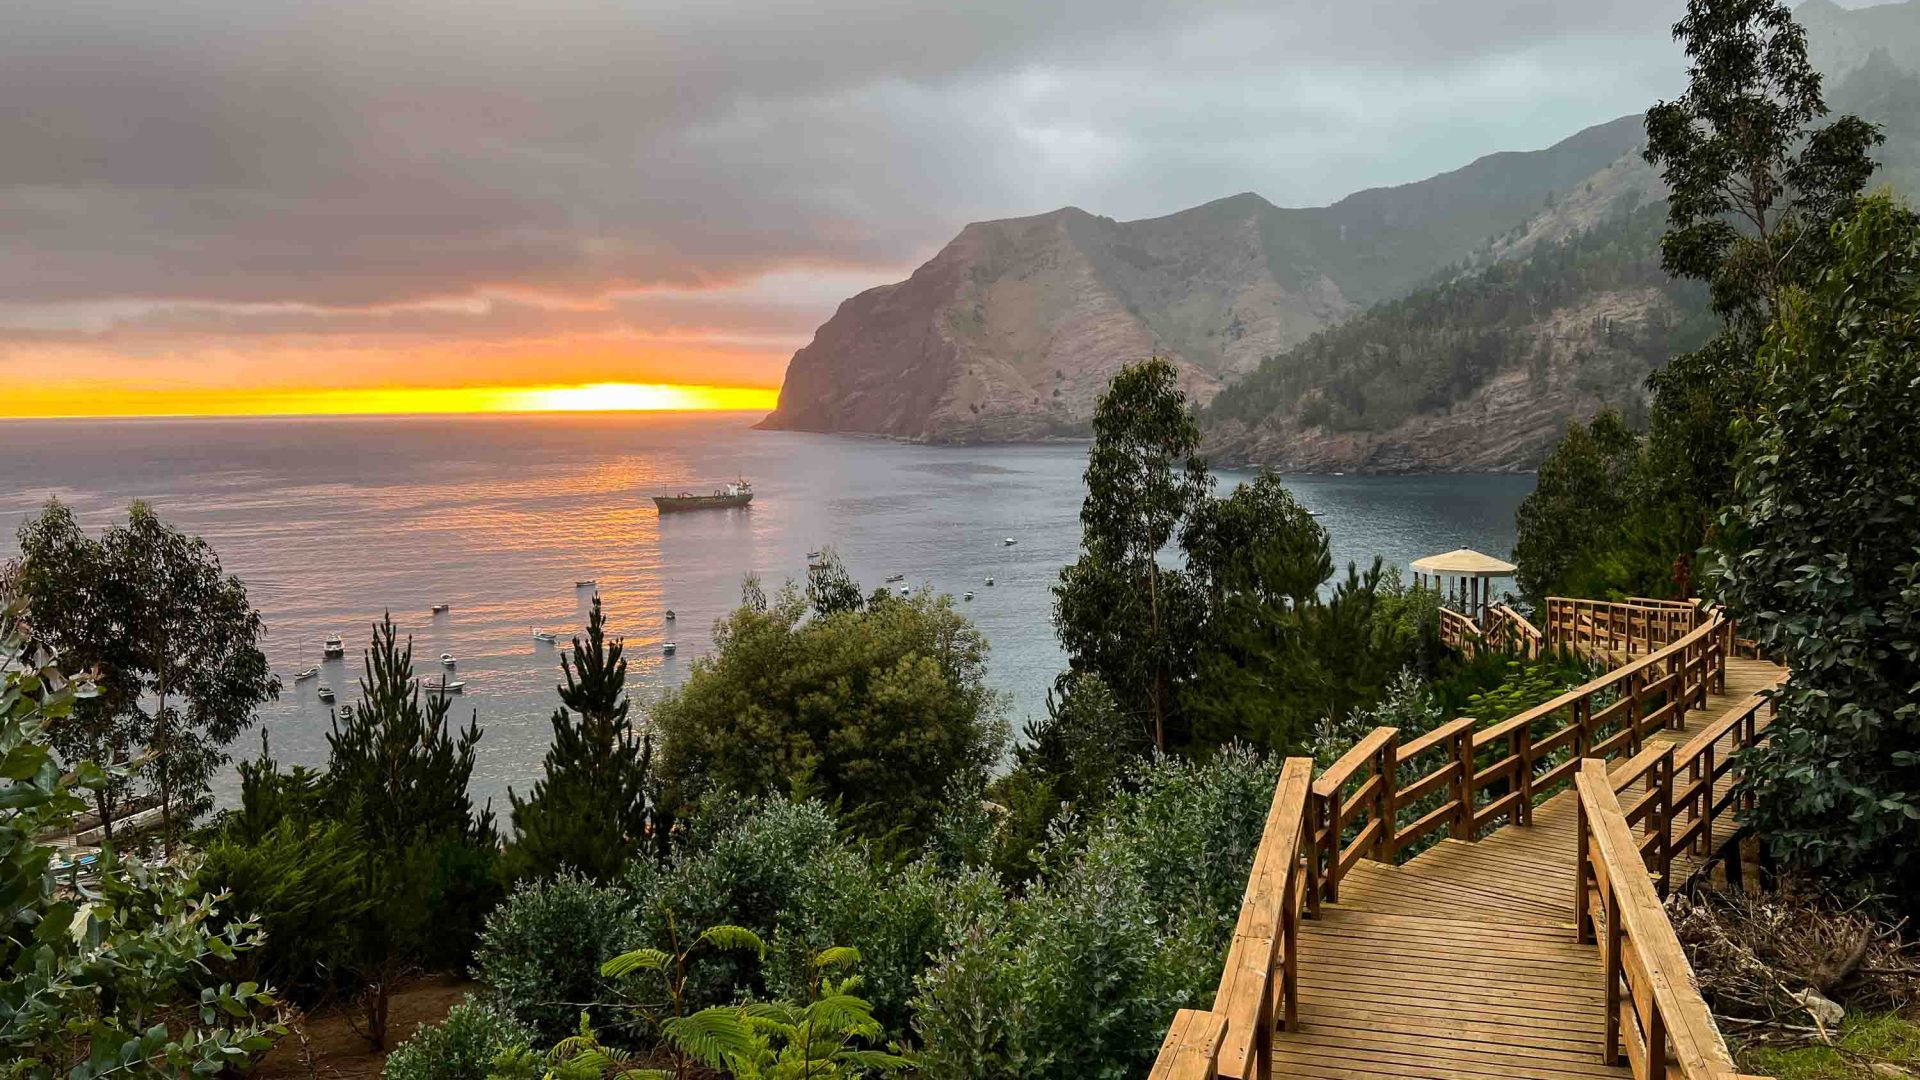 A wooden boardwalk leads to the sun rise over the water on Robinson Crusoe Island.